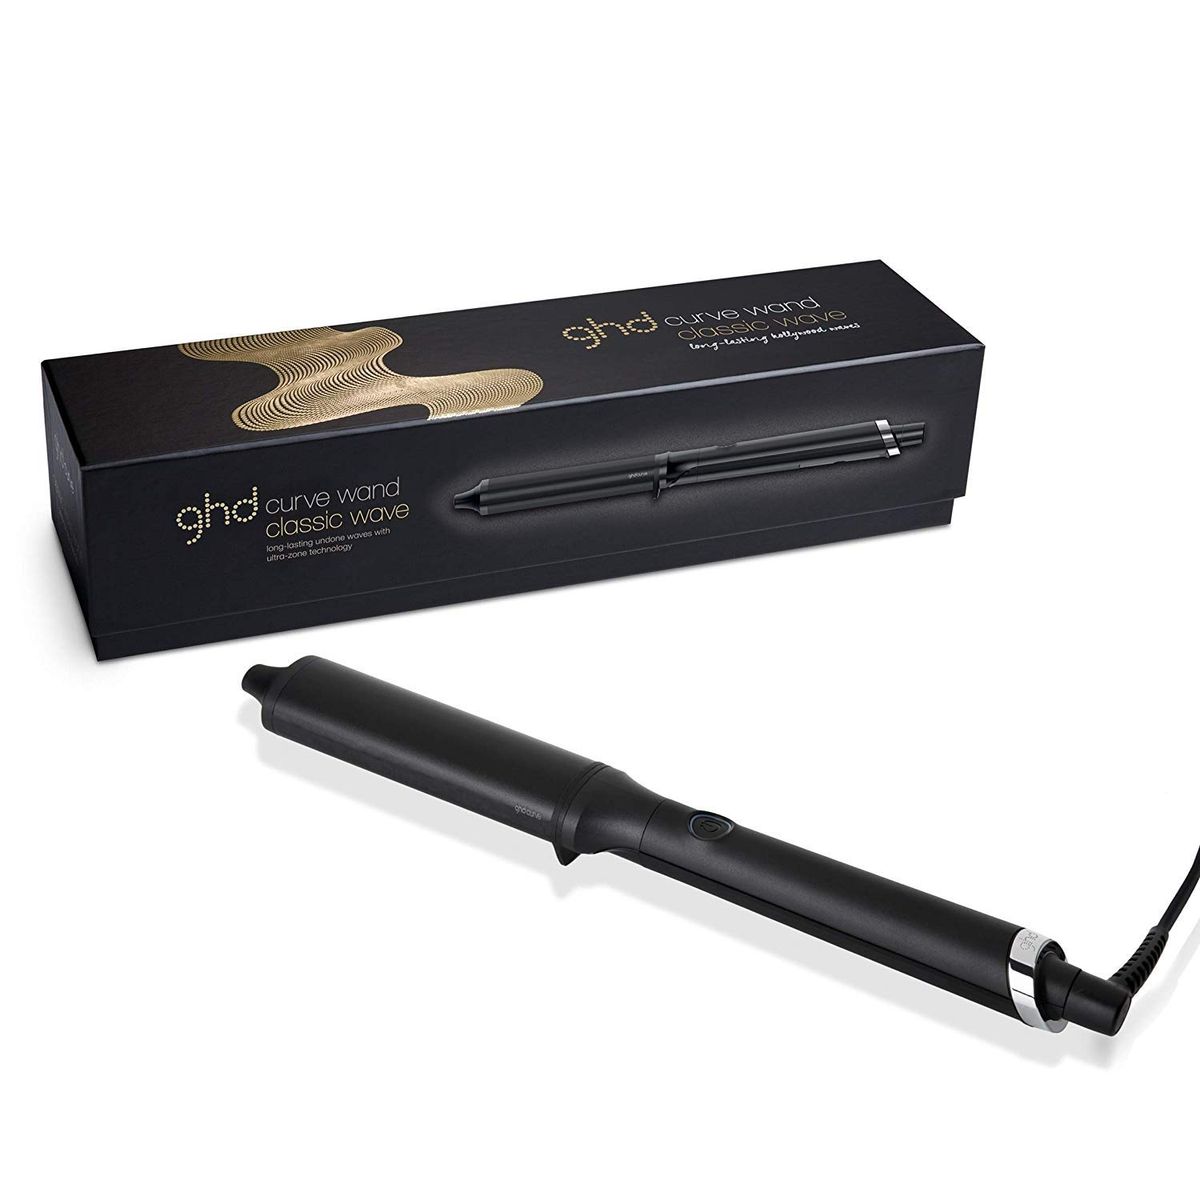 GHD sale alert! 20% off in the UK and